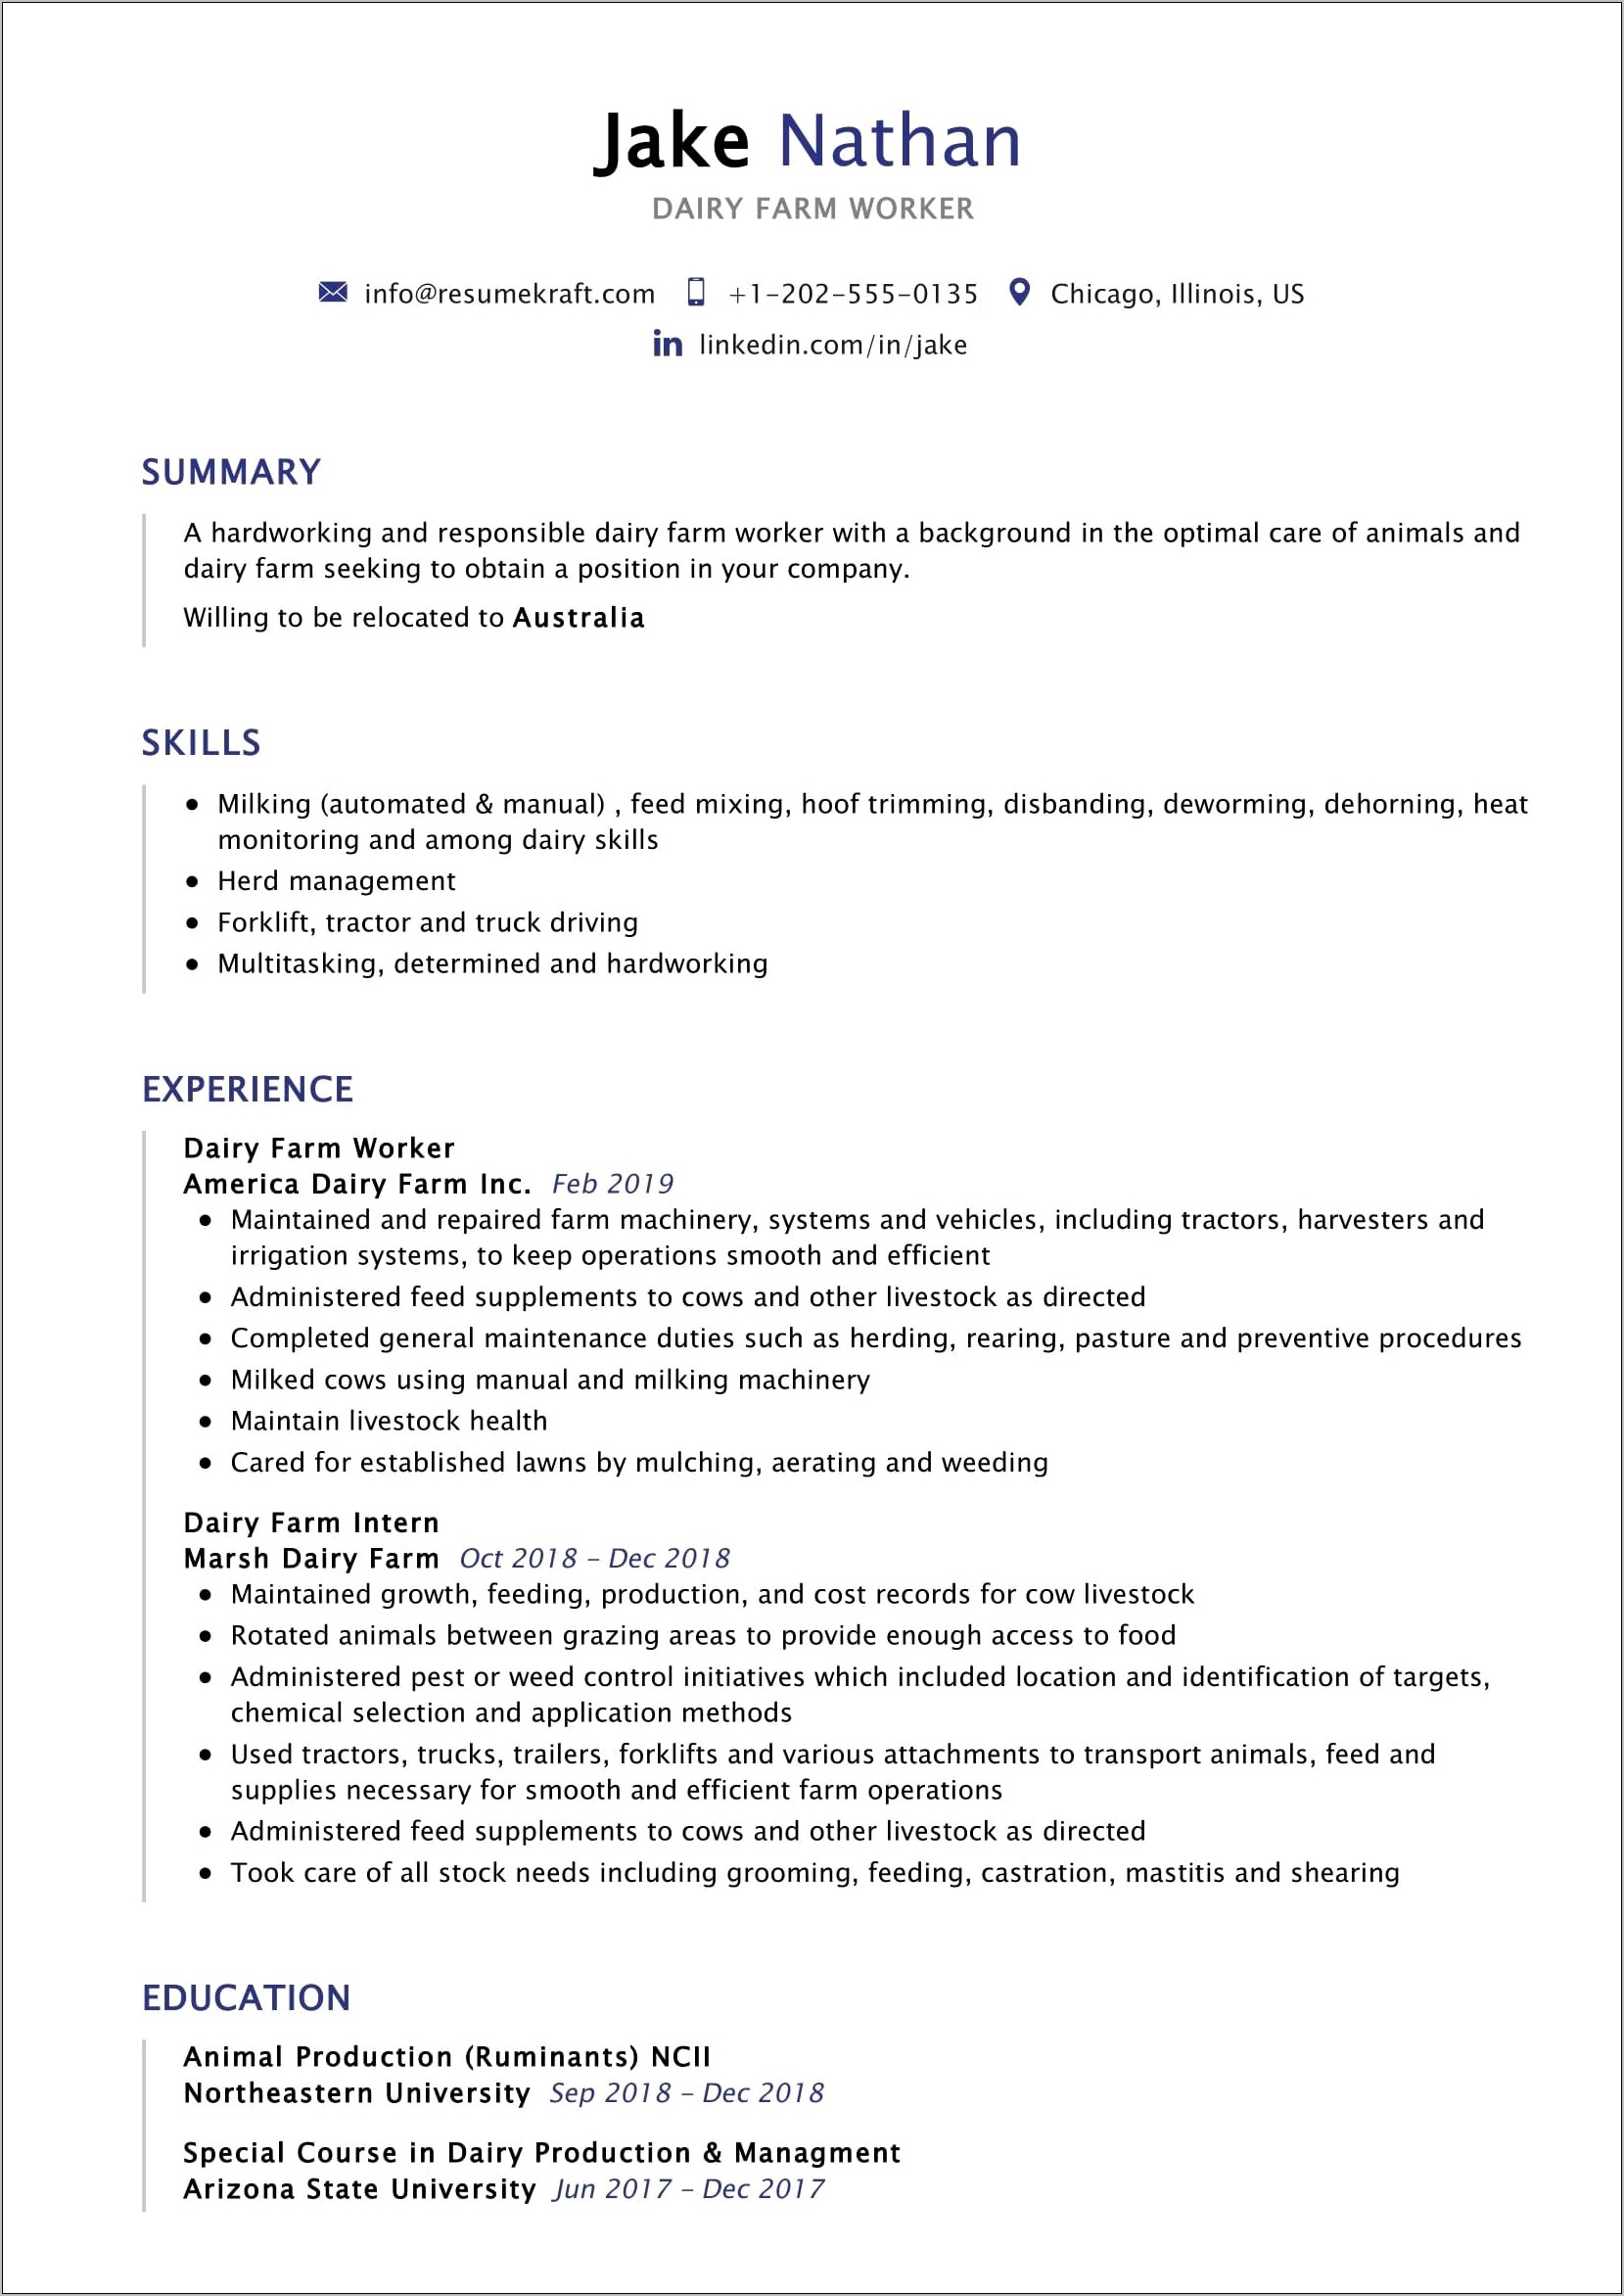 Resume Objective For Applying A Job